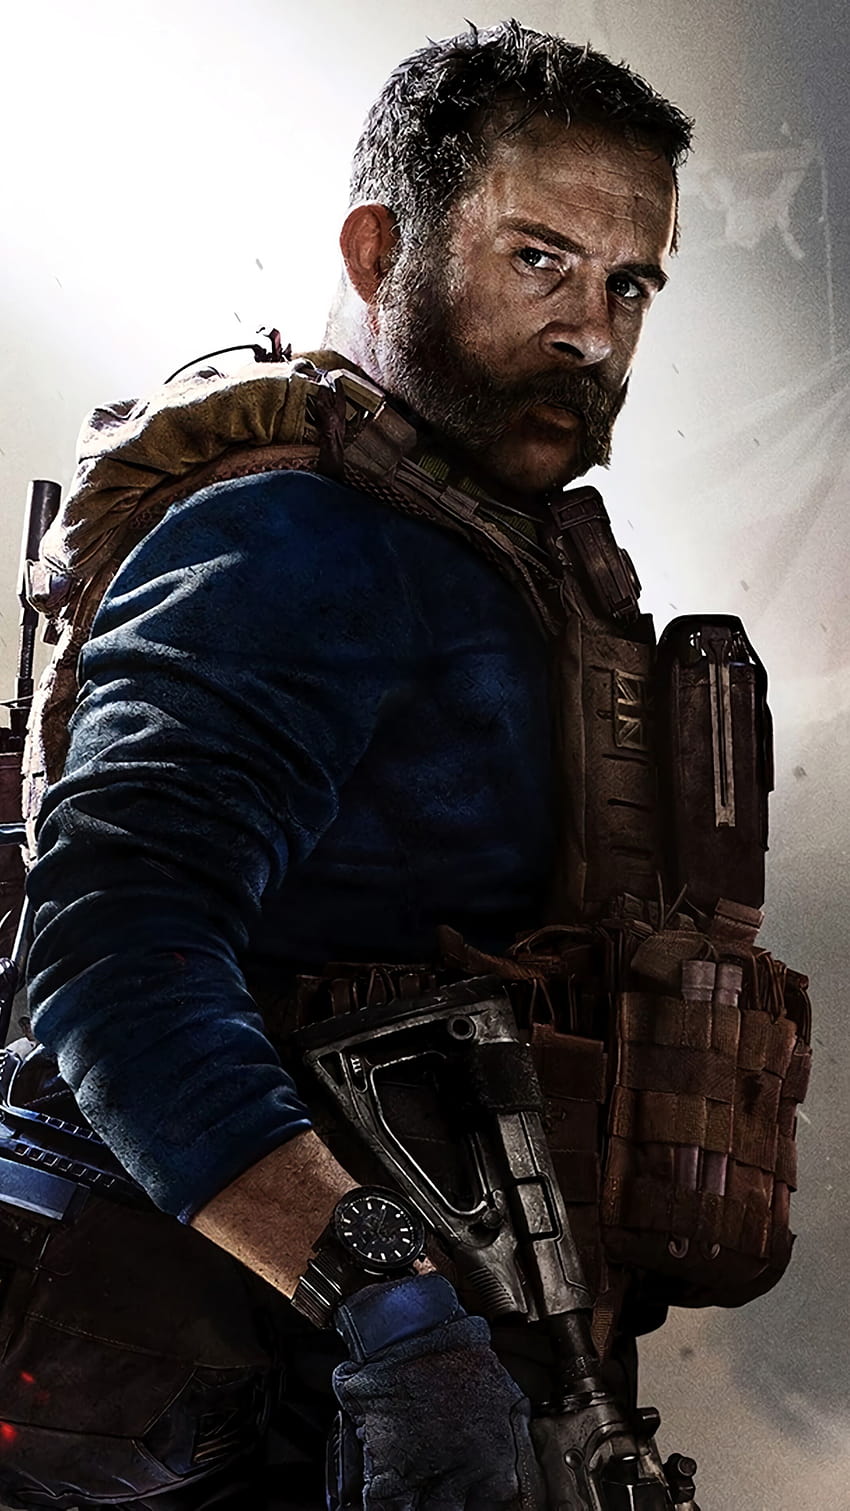 Captain Price, call of duty portrait HD phone wallpaper